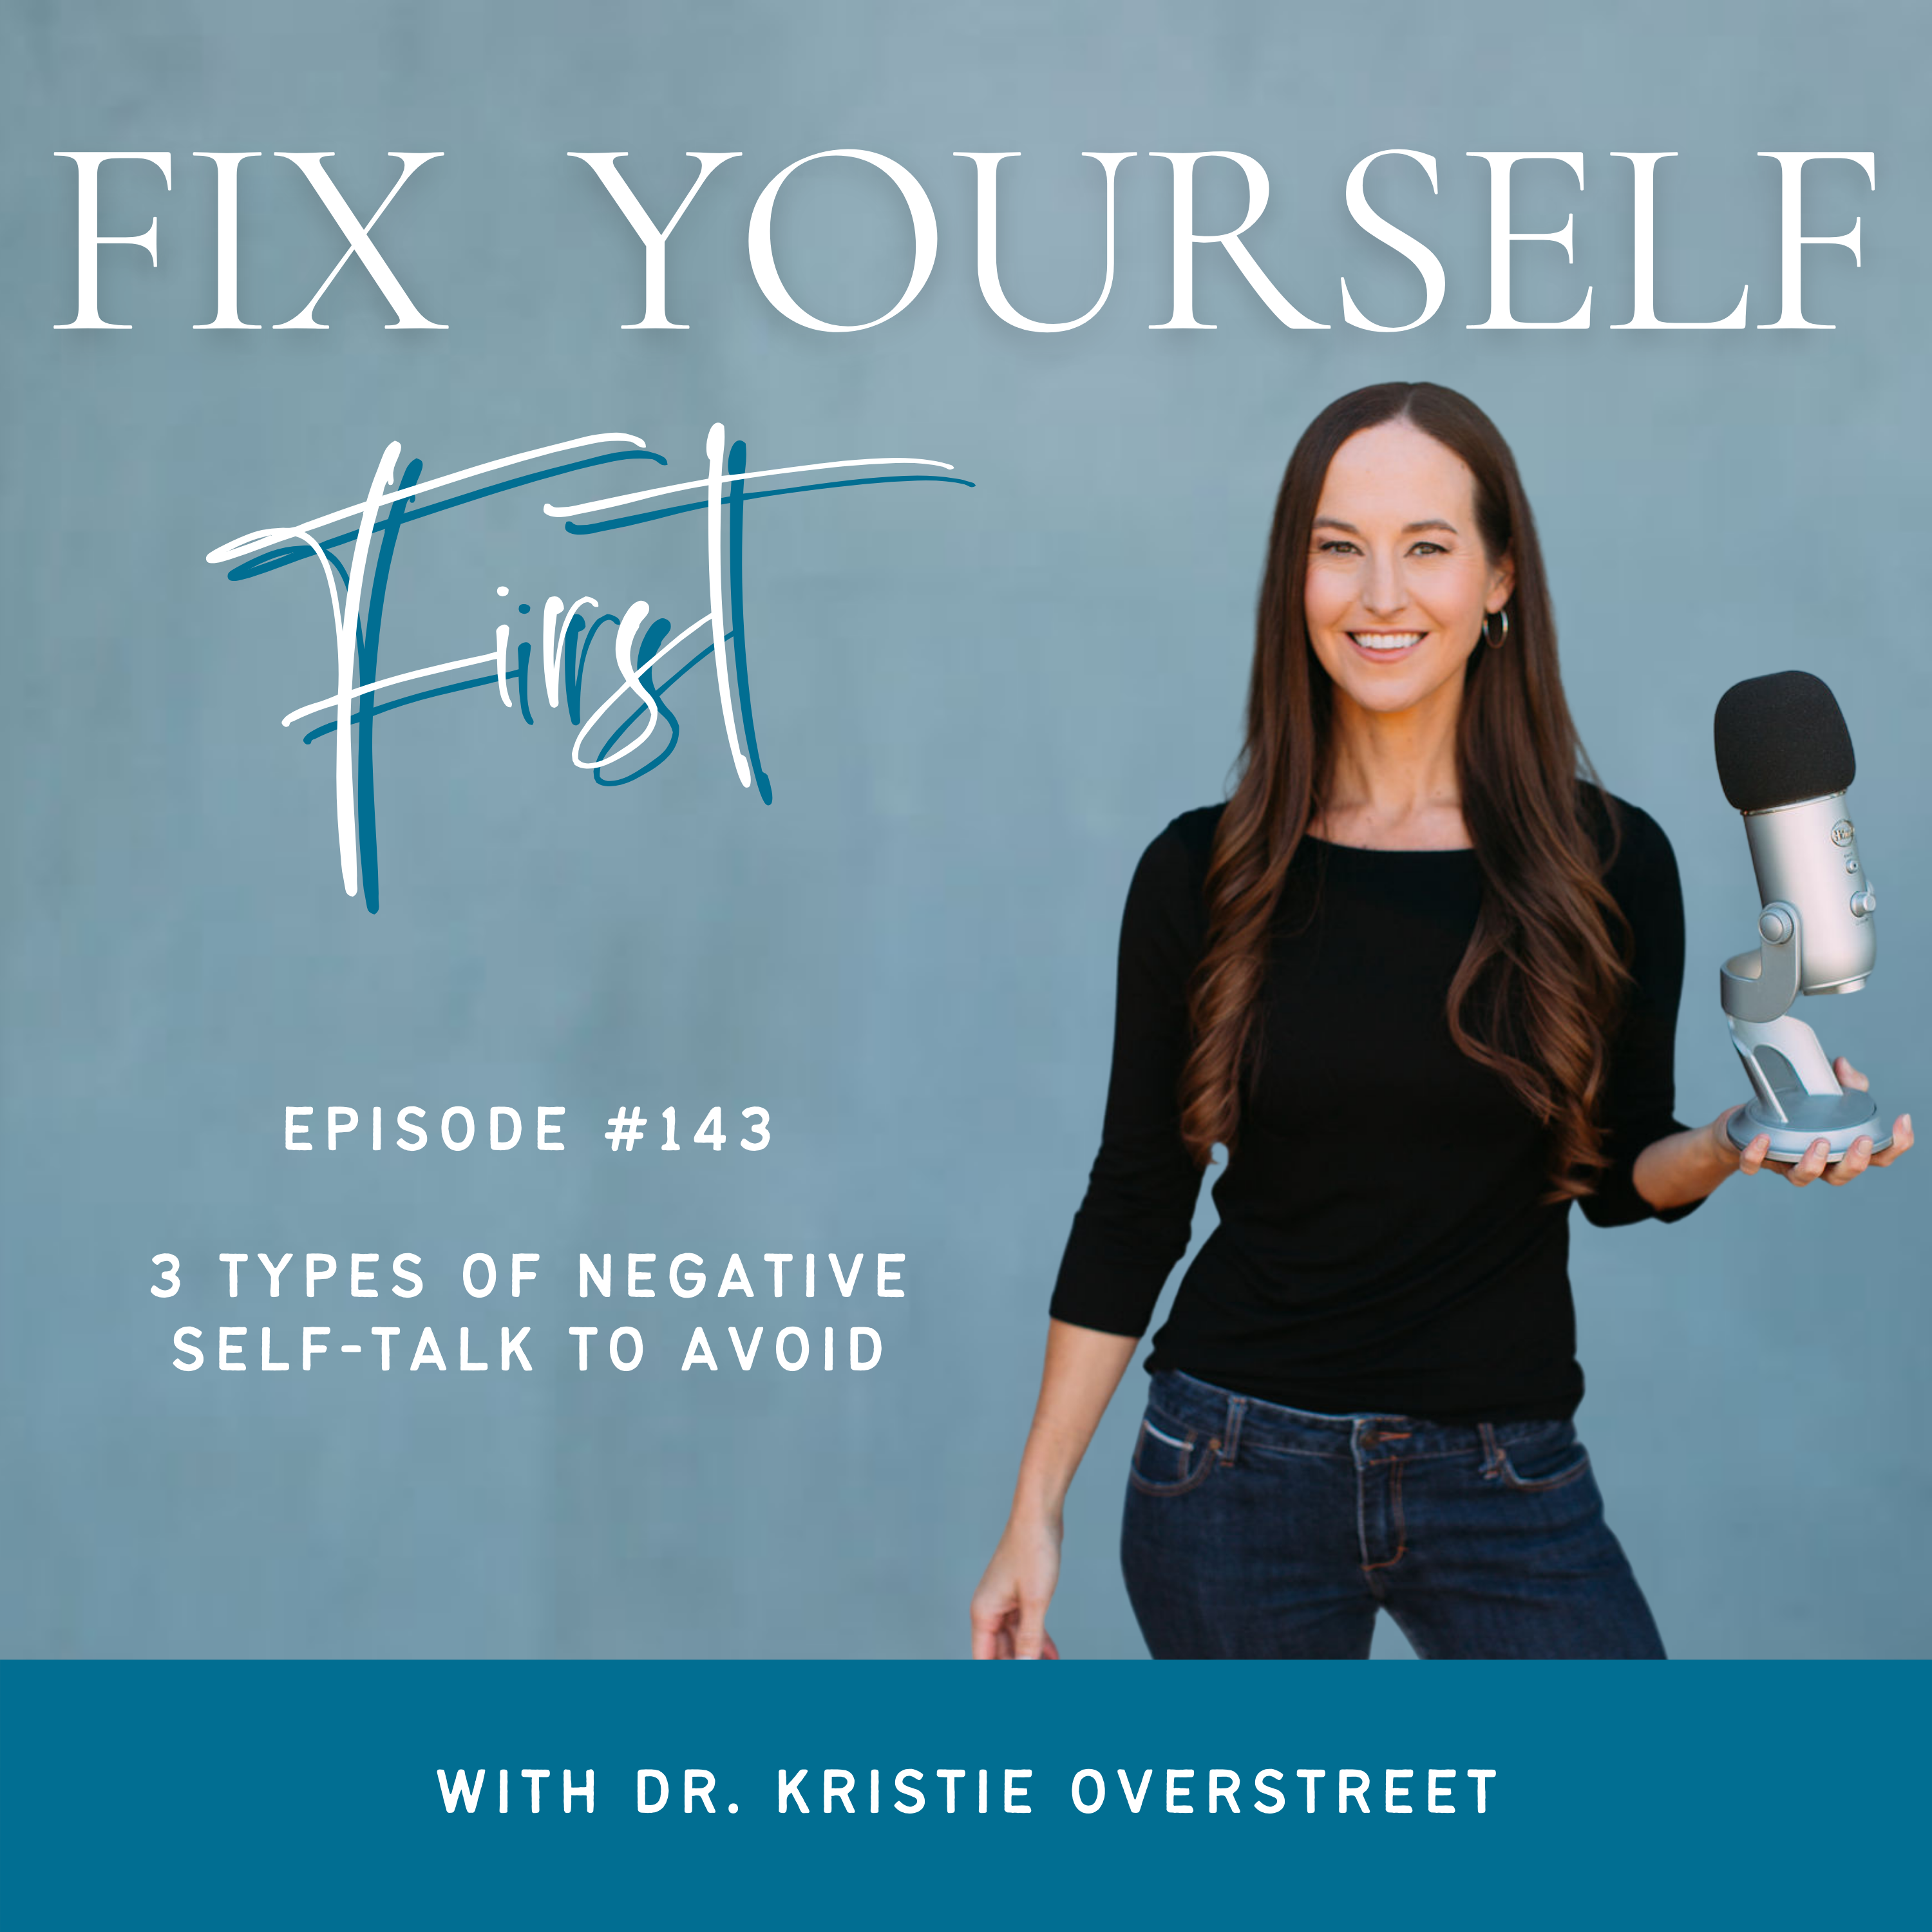 Fix Yourself First Episode 143 3 Types of Negative Self-Talk to Avoid